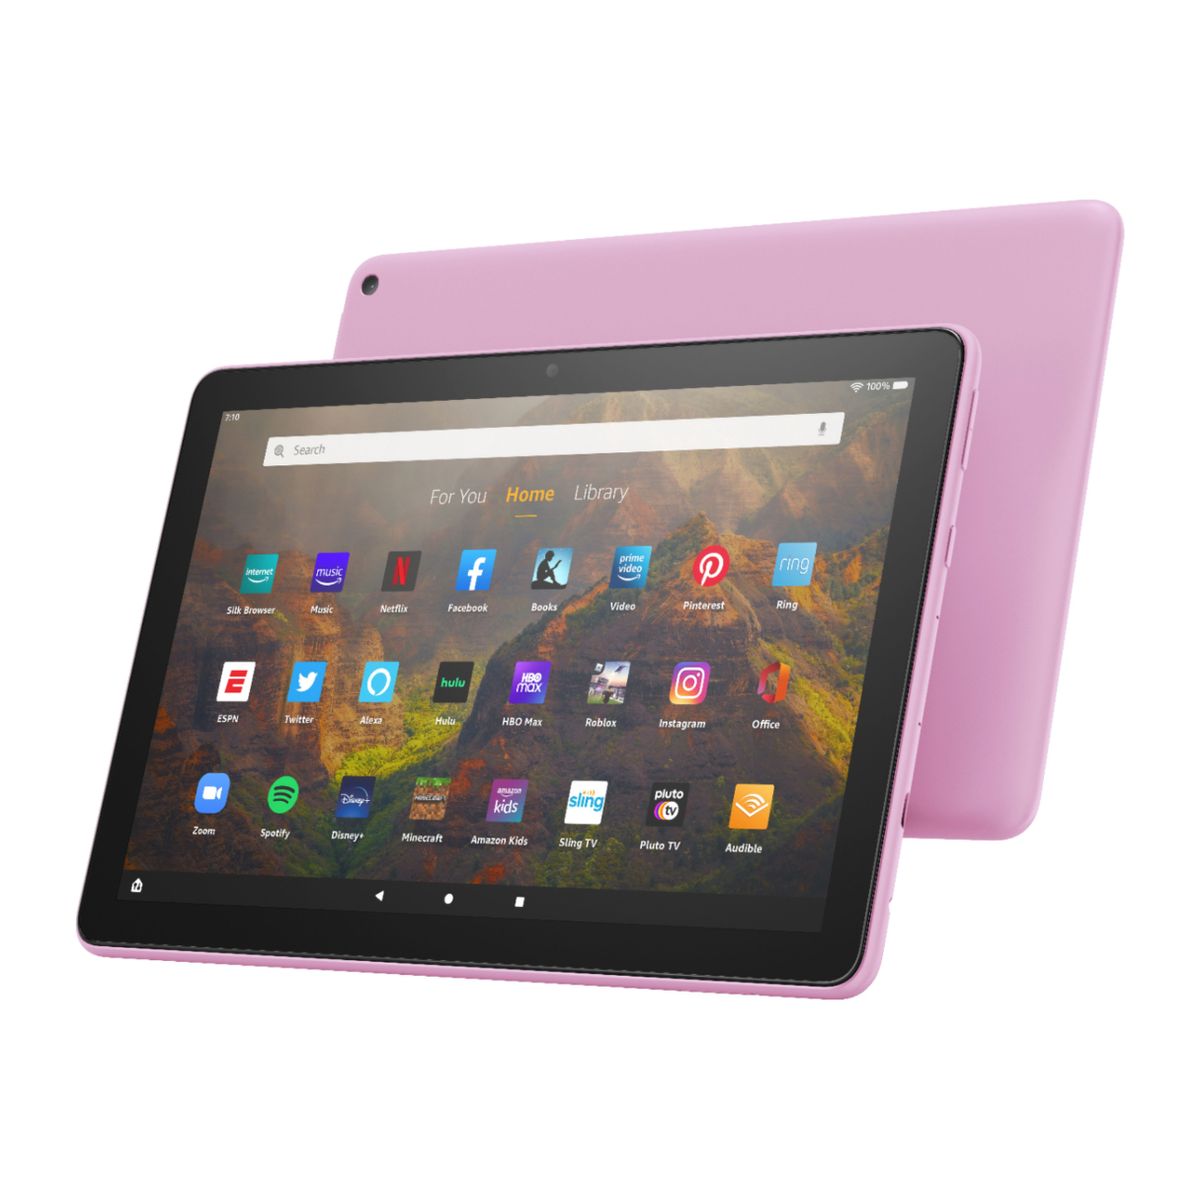 Photos - Tablet Amazon Kindle Fire HD 10 10.1-inch   - Lavende (1080p Full HD, 32 GB)